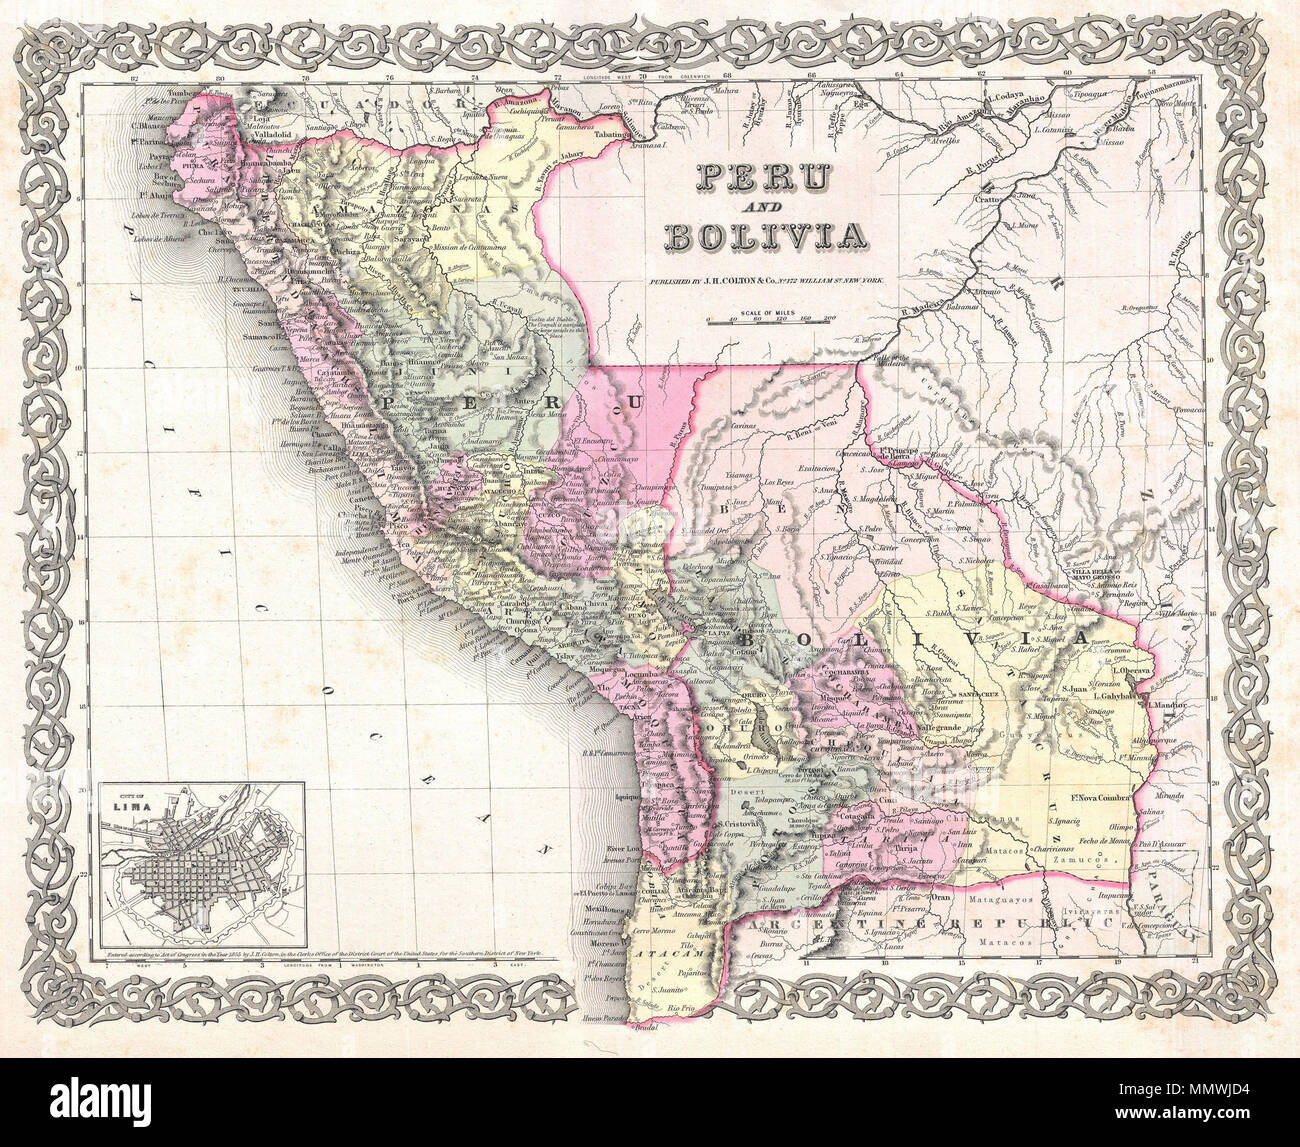 .  English: An excellent first edition example of Colton's rare 1855 map Peru and Bolivia. Covers from Ecuador to the Argentine Republic and from the Pacific to Brazil. Shows Bolivia's claims to the Atacama desert and Peru's claims to Moquegua - both of which are today part of Chile. An inset detail map of Lima, Peru, appears in the lower left quadrant. Throughout the map Colton identifies various cities, towns, forts, rivers, rapids, fords, and an assortment of additional topographical details. Map is hand colored in pink, green, yellow and blue pastels to define national and regional boundar Stock Photo